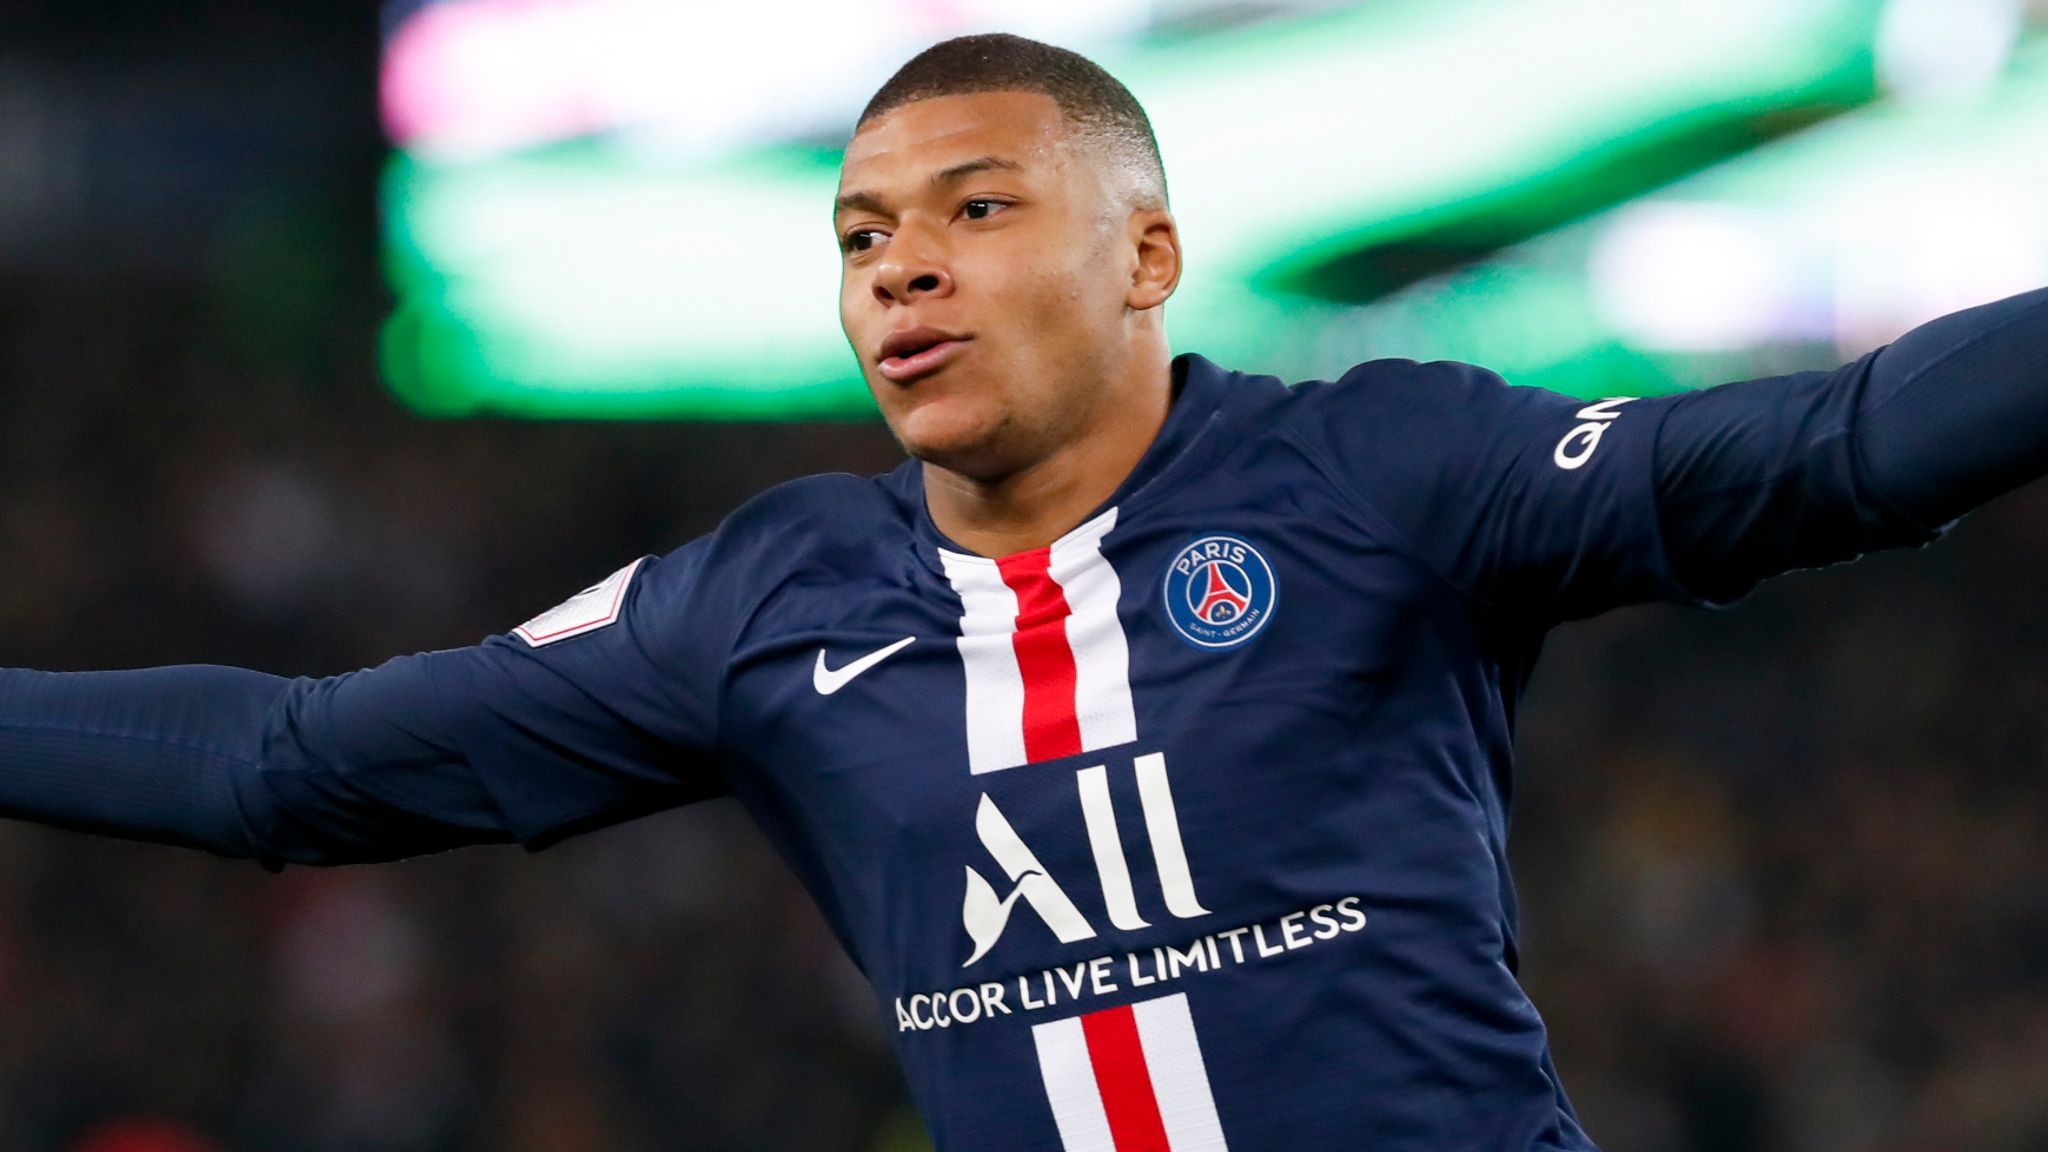 Kylian Mbappe: I want to win PSG first Champions League